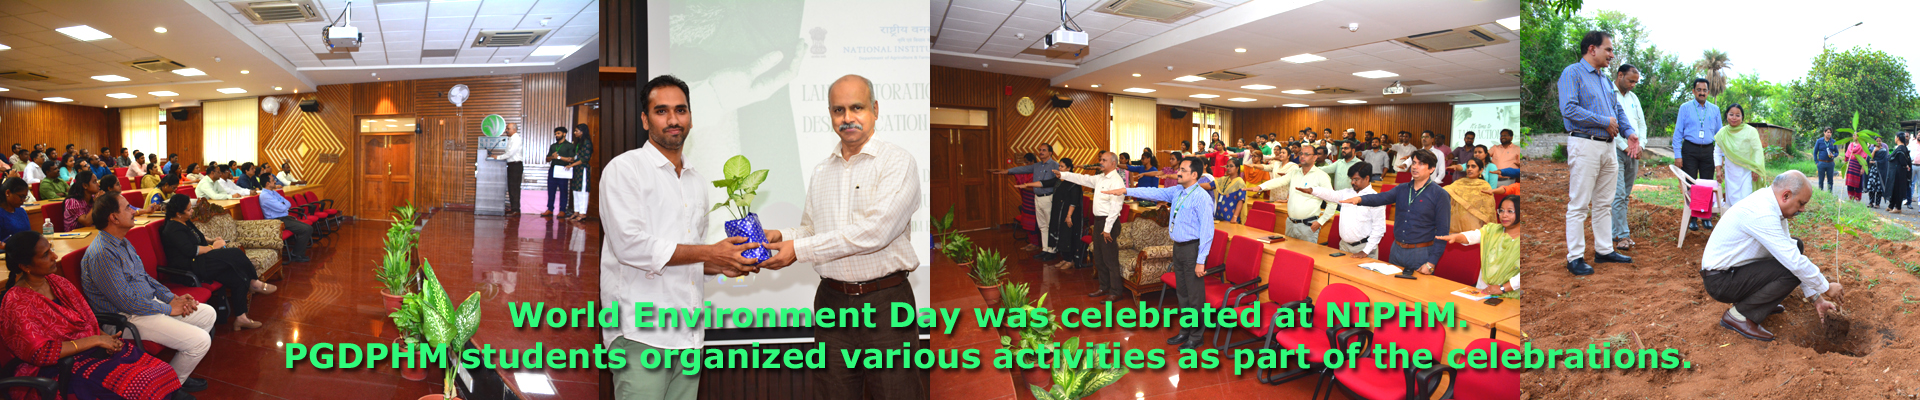 World Environment Day was celebrated at NIPHM. PGDPHM students organized various activities as part of the celebrations. 